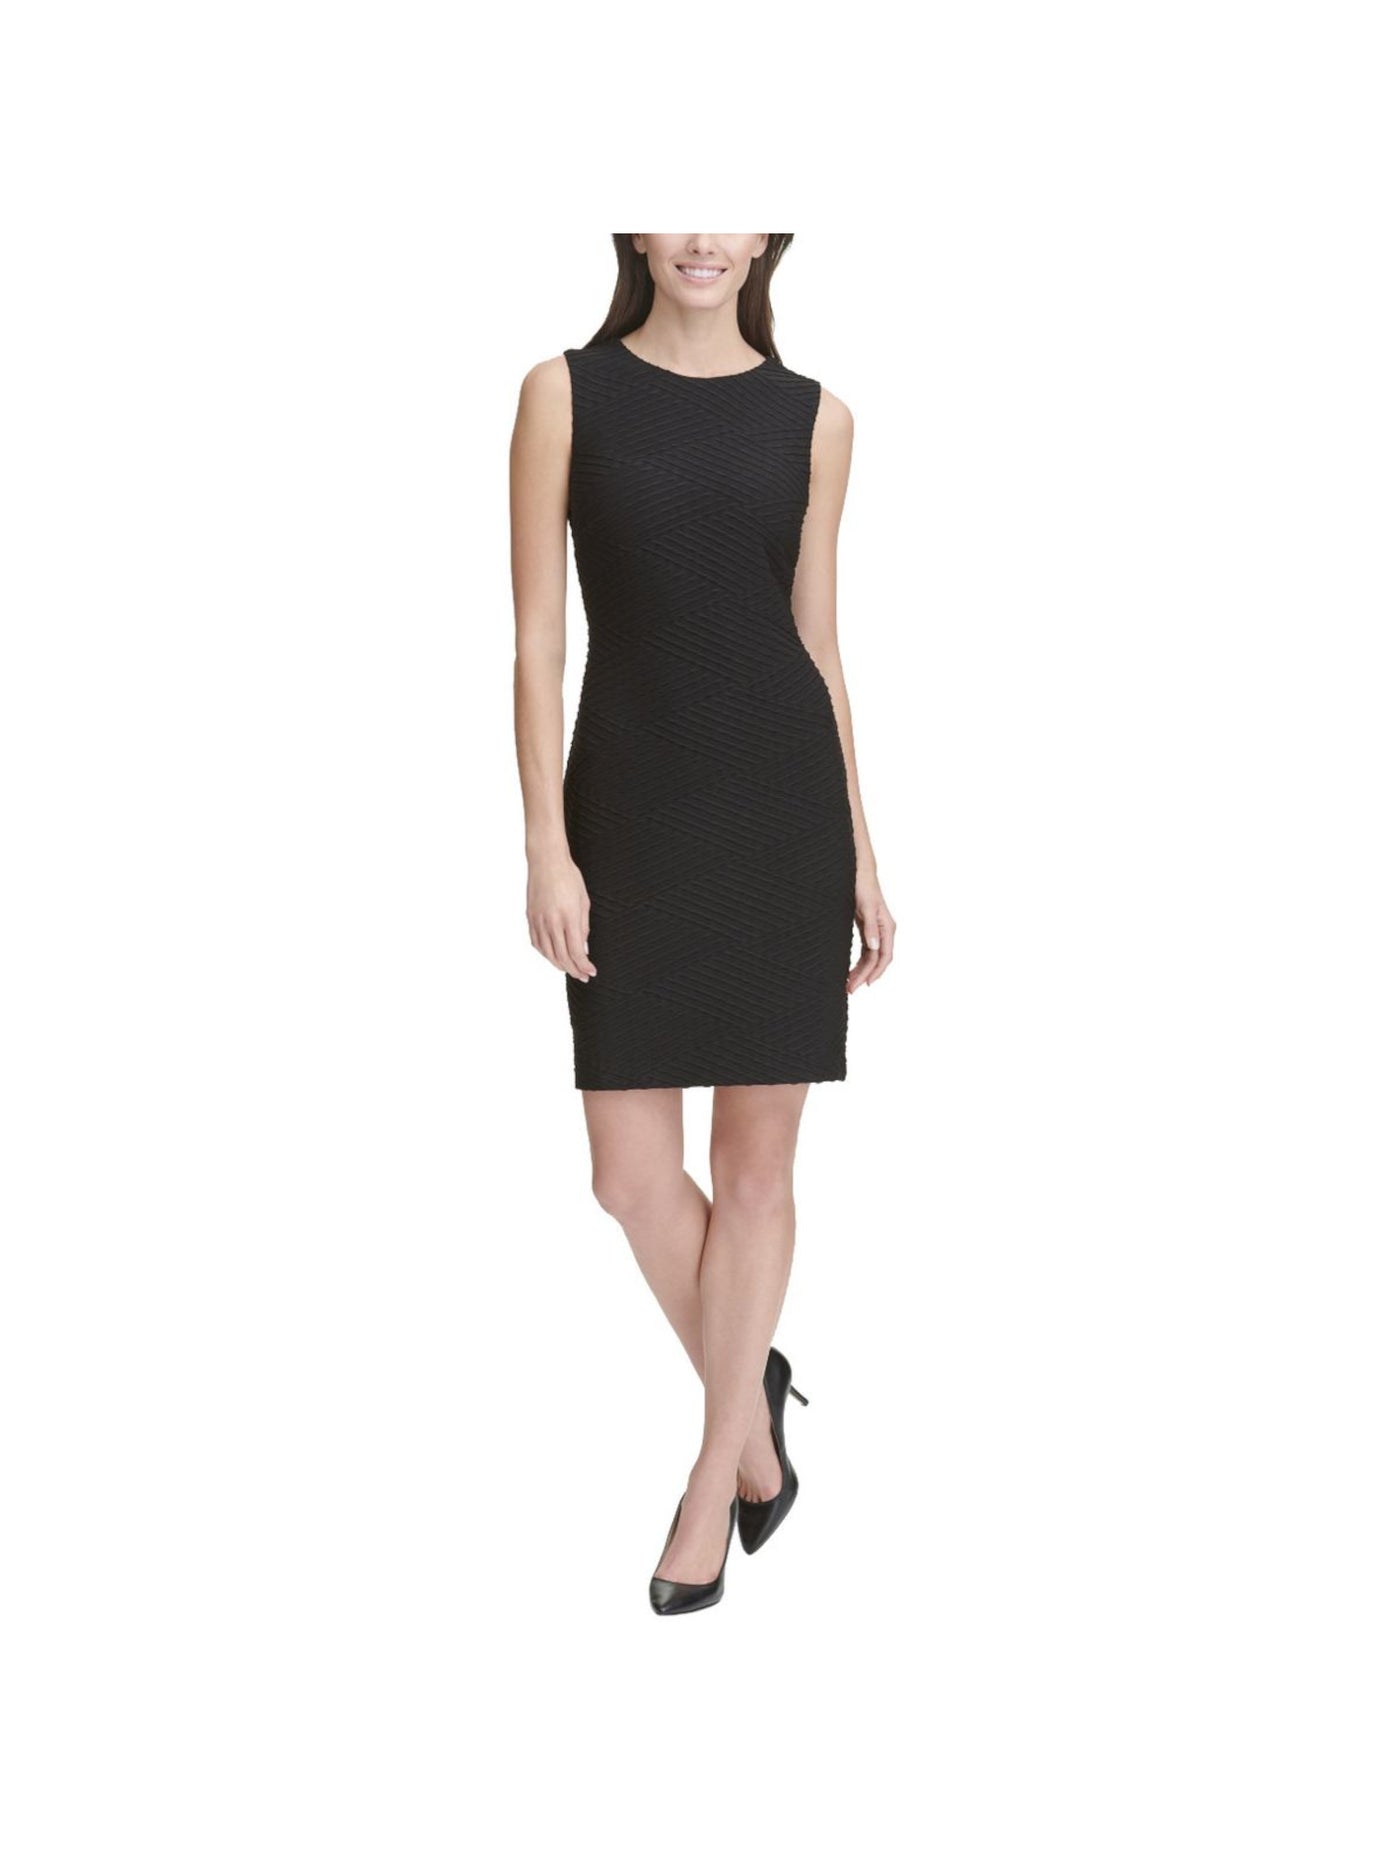 TOMMY HILFIGER Womens Black Stretch Zippered Textured Lined Sleeveless Jewel Neck Above The Knee Cocktail Sheath Dress 16